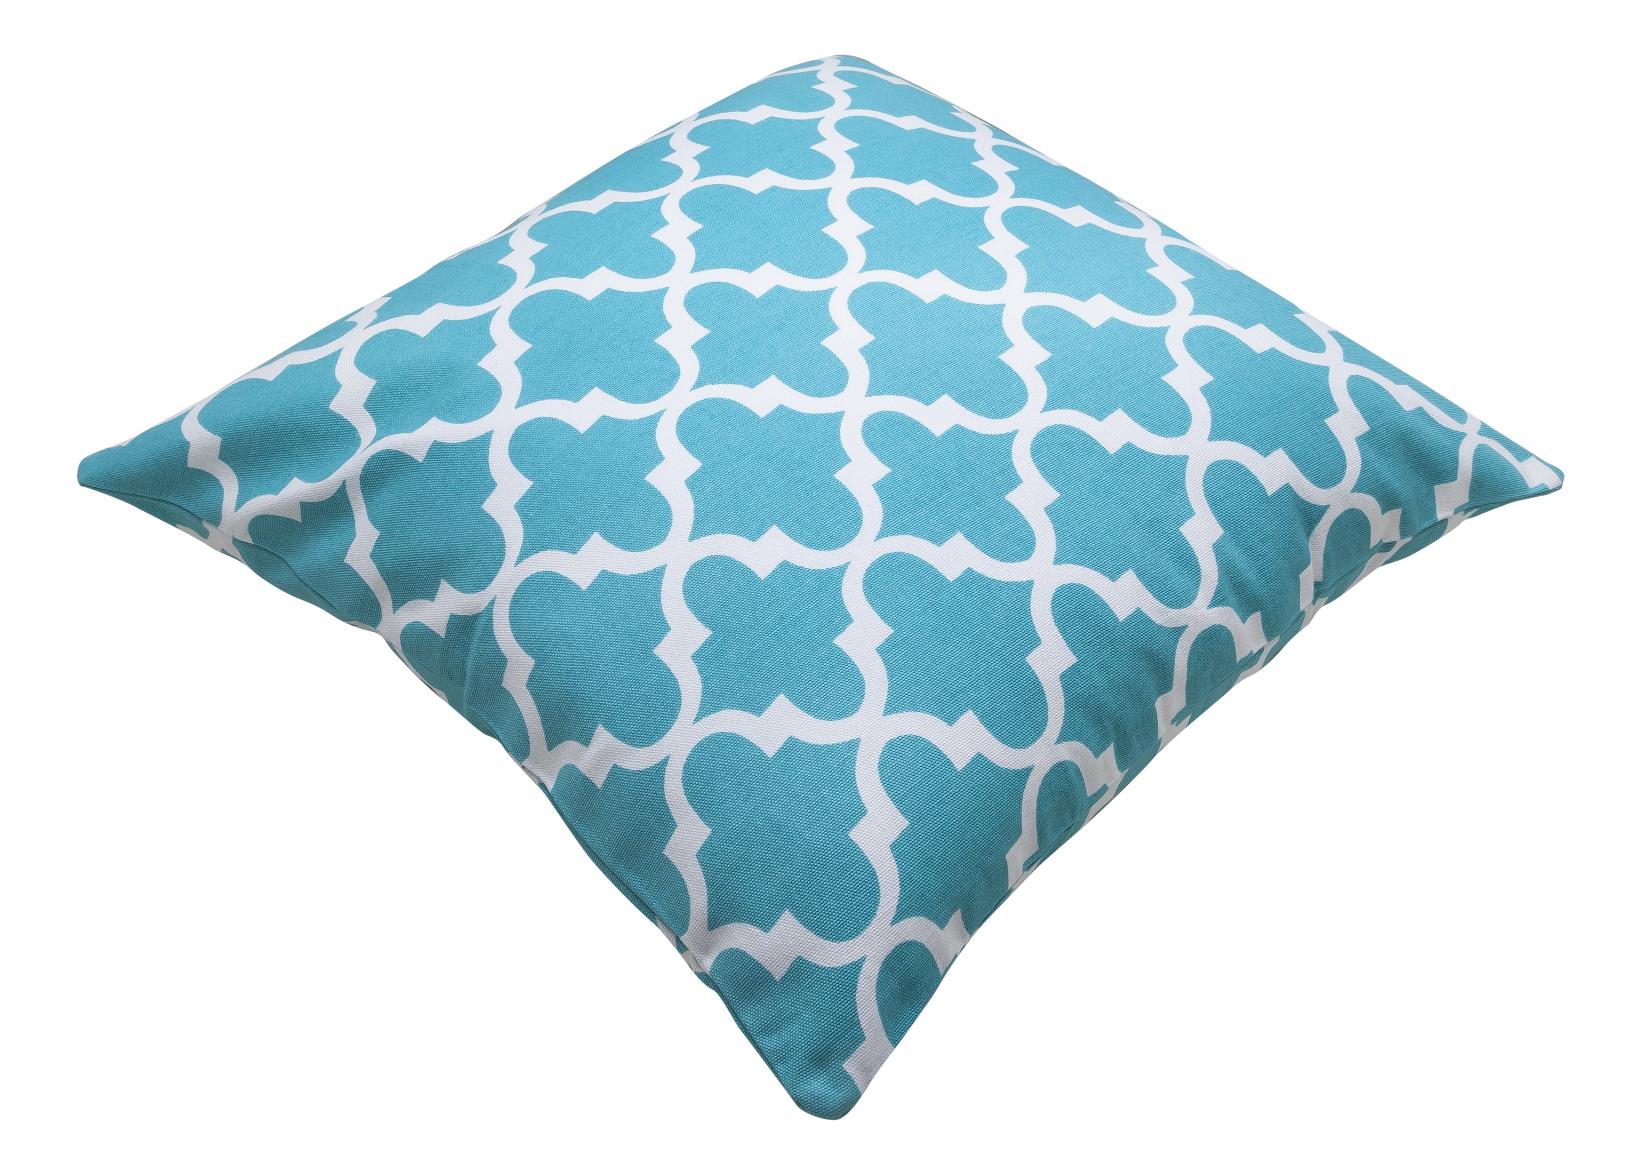 Trellis Accent Throw Pillow Covers (Pack of 2) - TreeWool